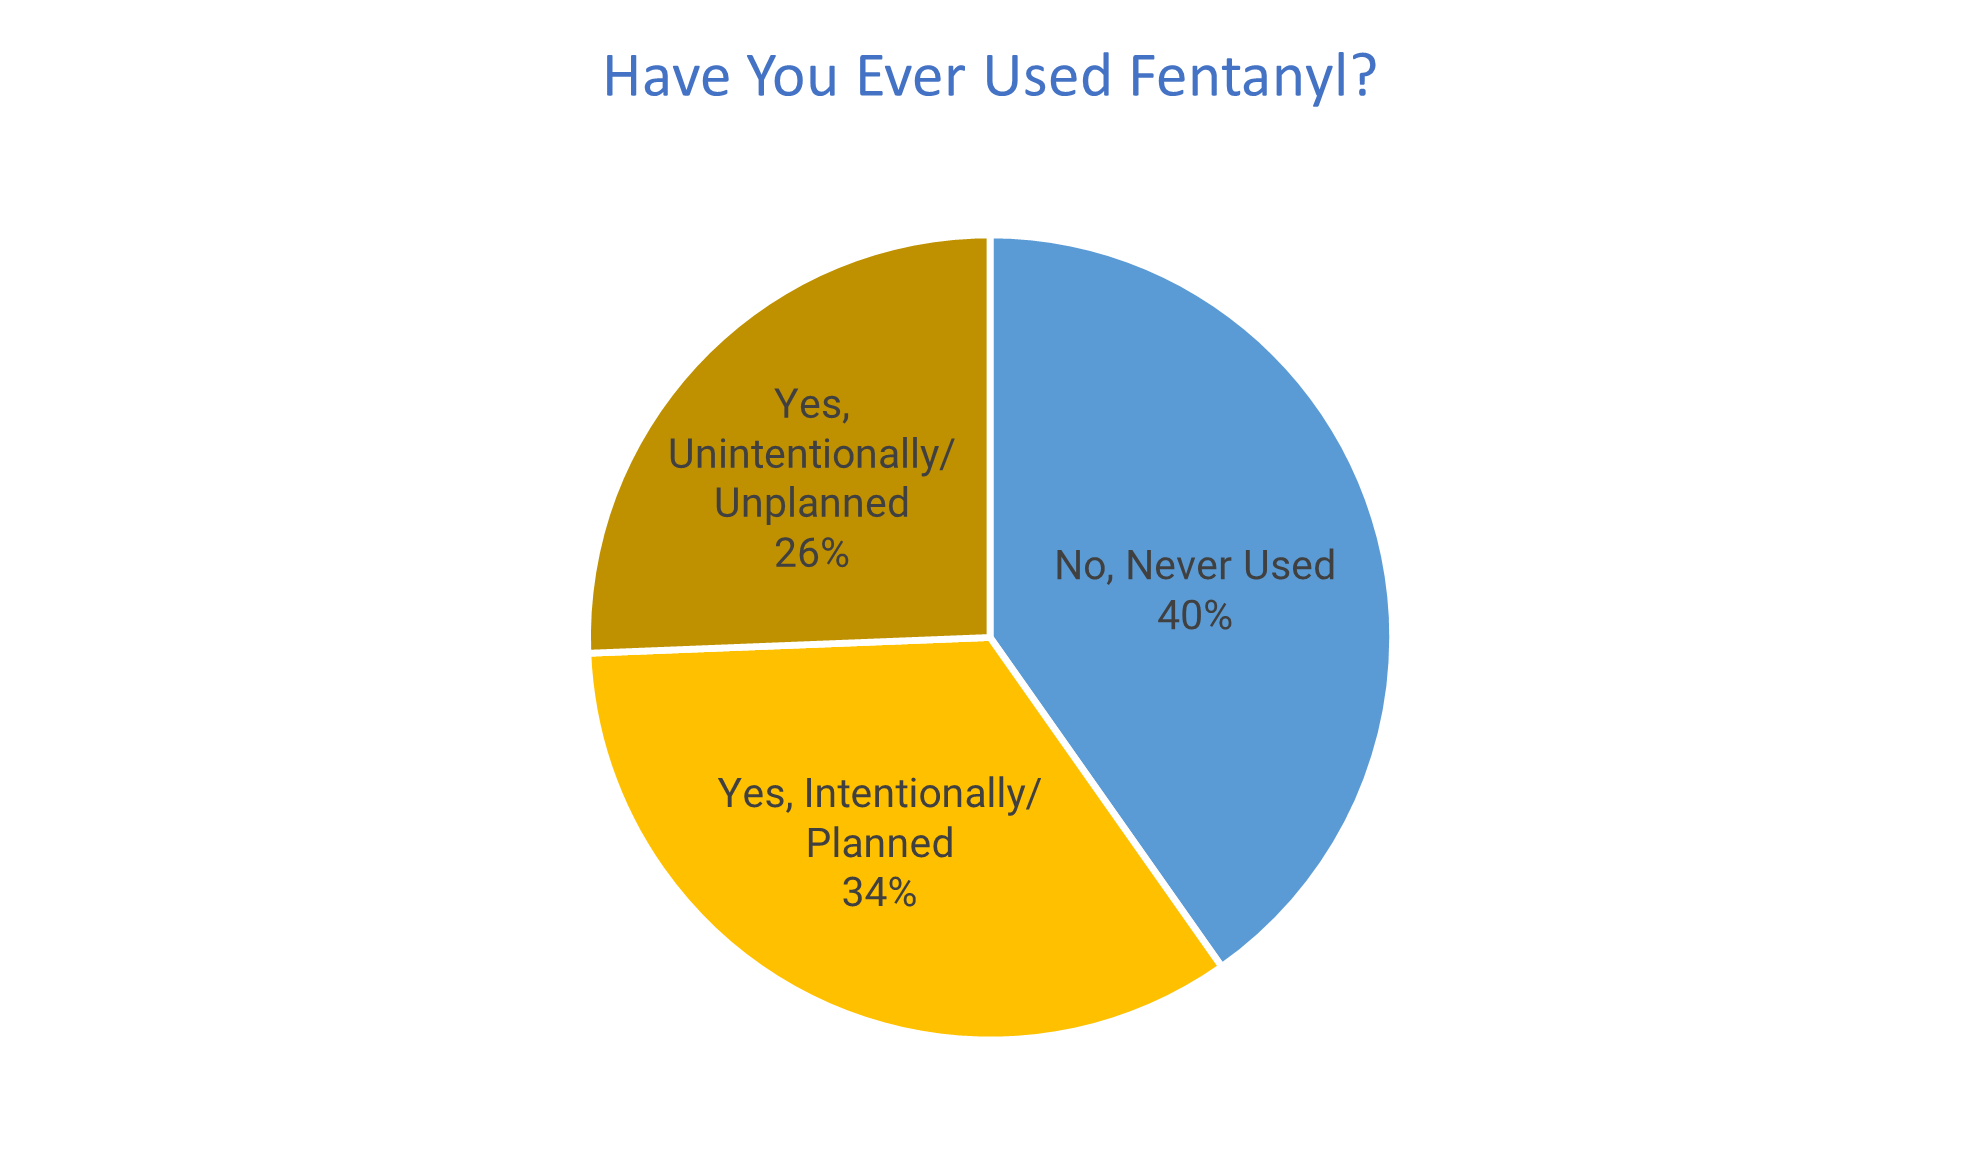 Have you ever used fentanyl pie chart